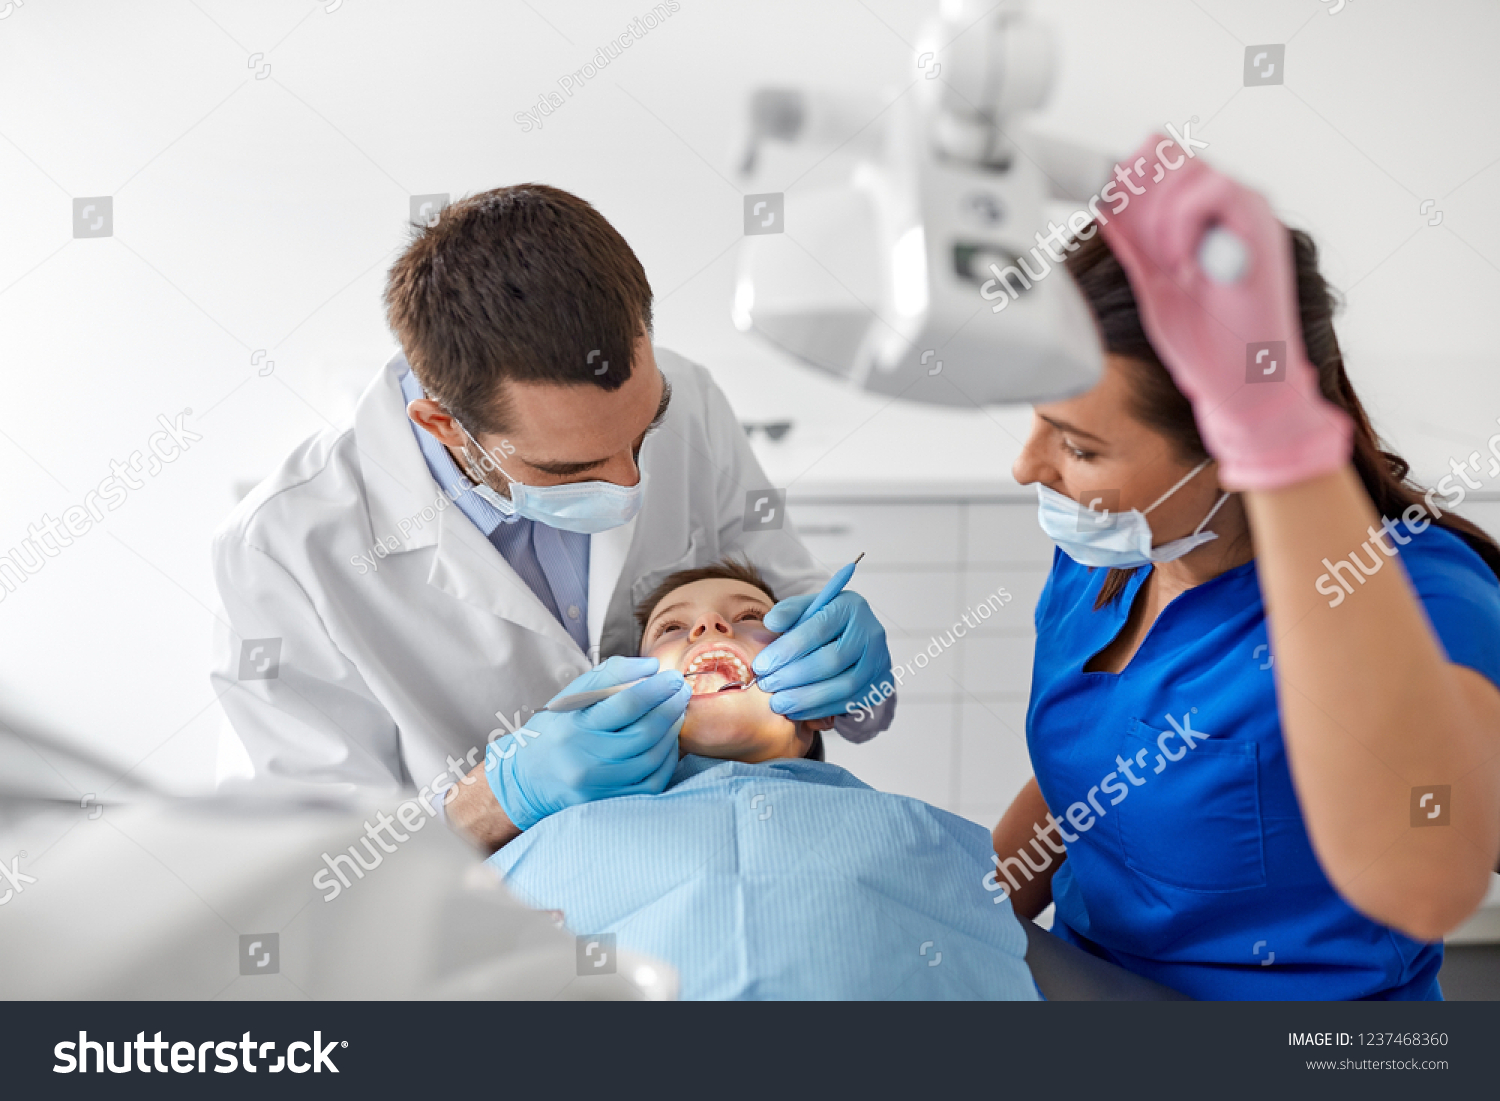 medicine, dentistry and healthcare concept - dentist with mouth mirror and probe checking for kid patient teeth at dental clinic #1237468360